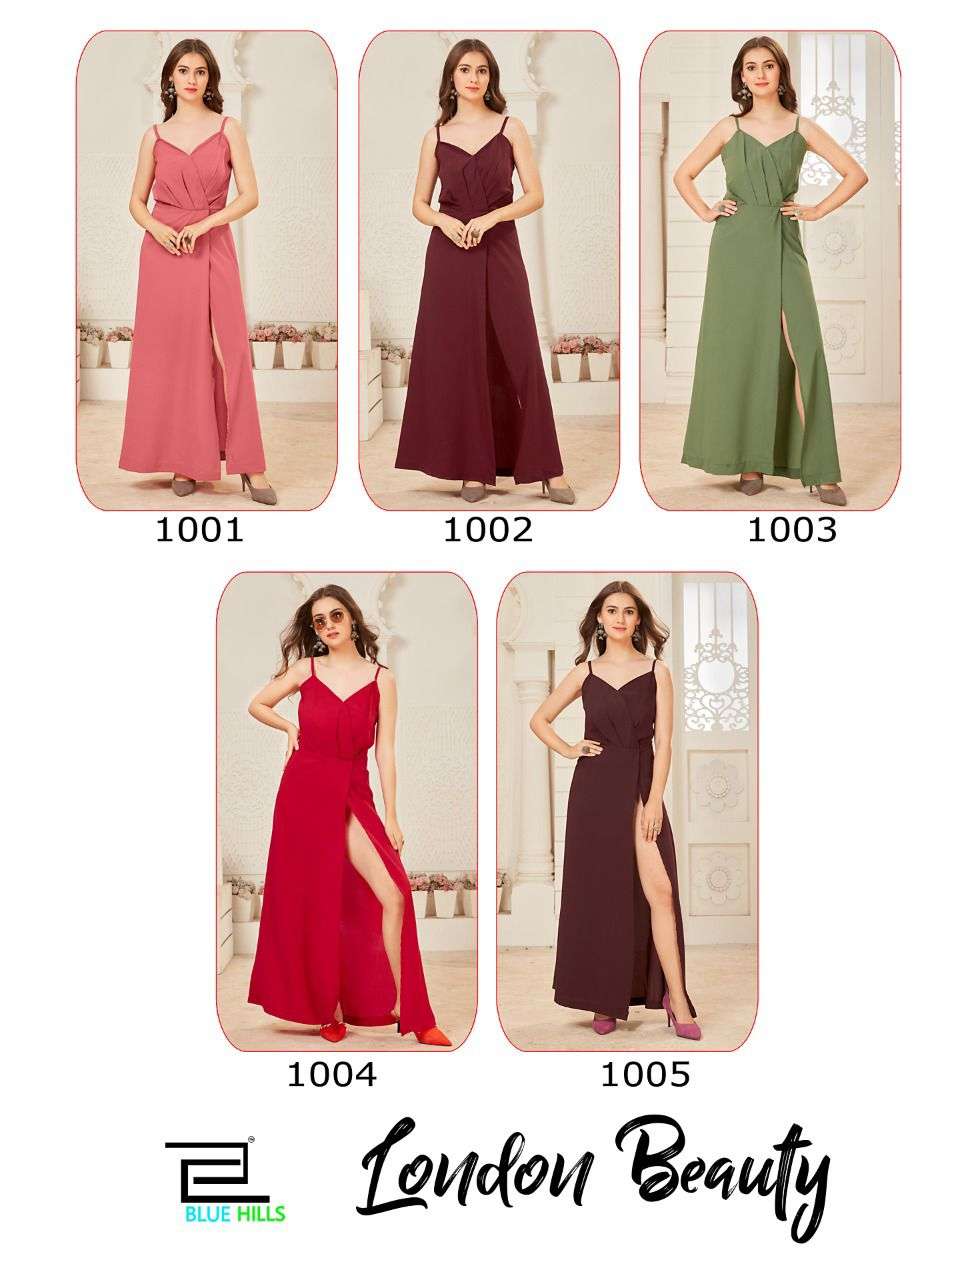 bluehills london beauty 1001-1005 series fancy western gown collection